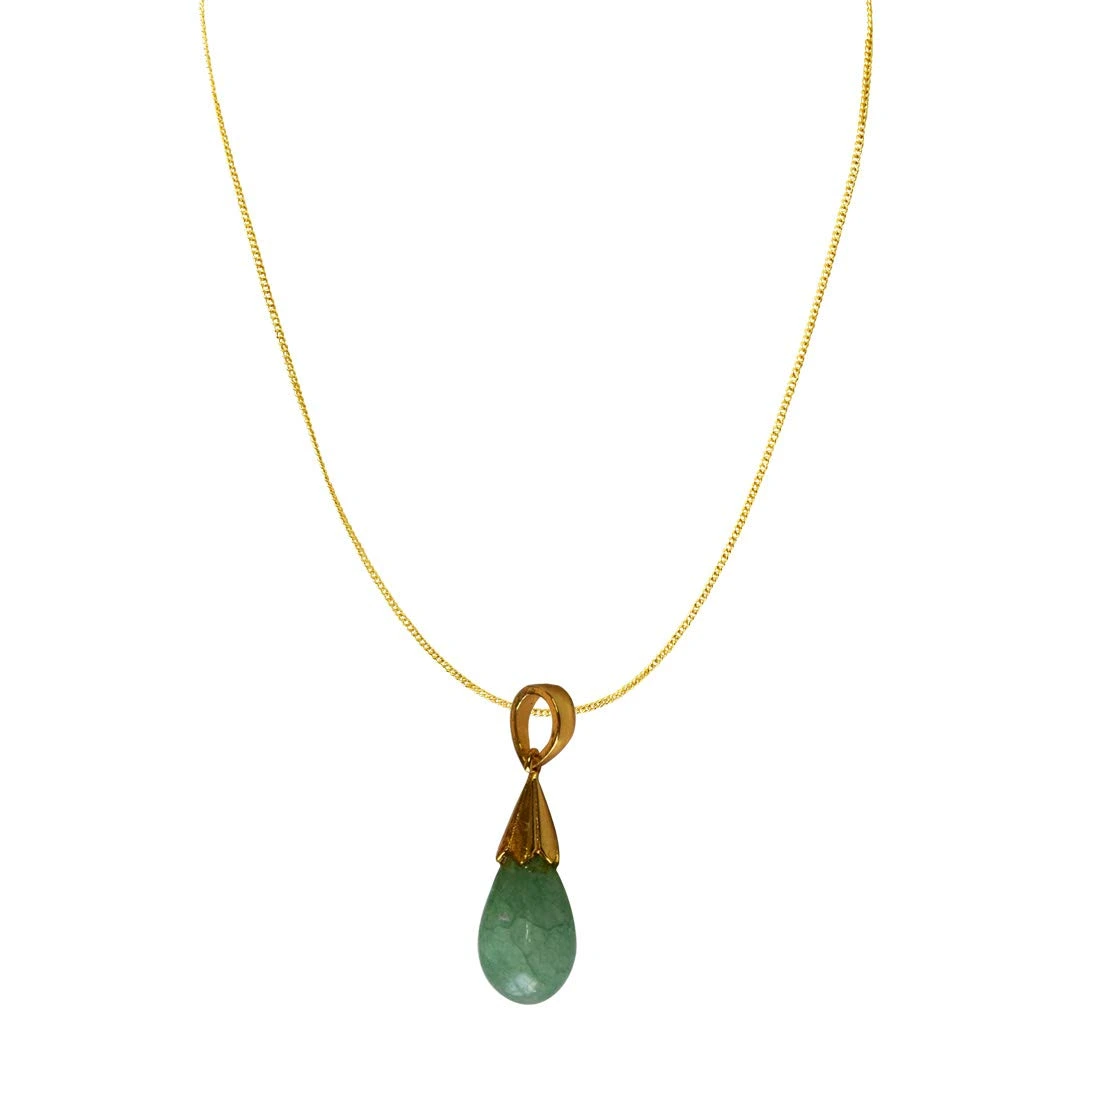 10.09 cts Real Drop Green Onyx Sterling Silver Pendant with Gold Finished Chain for Women (SDS319-10.09cts)